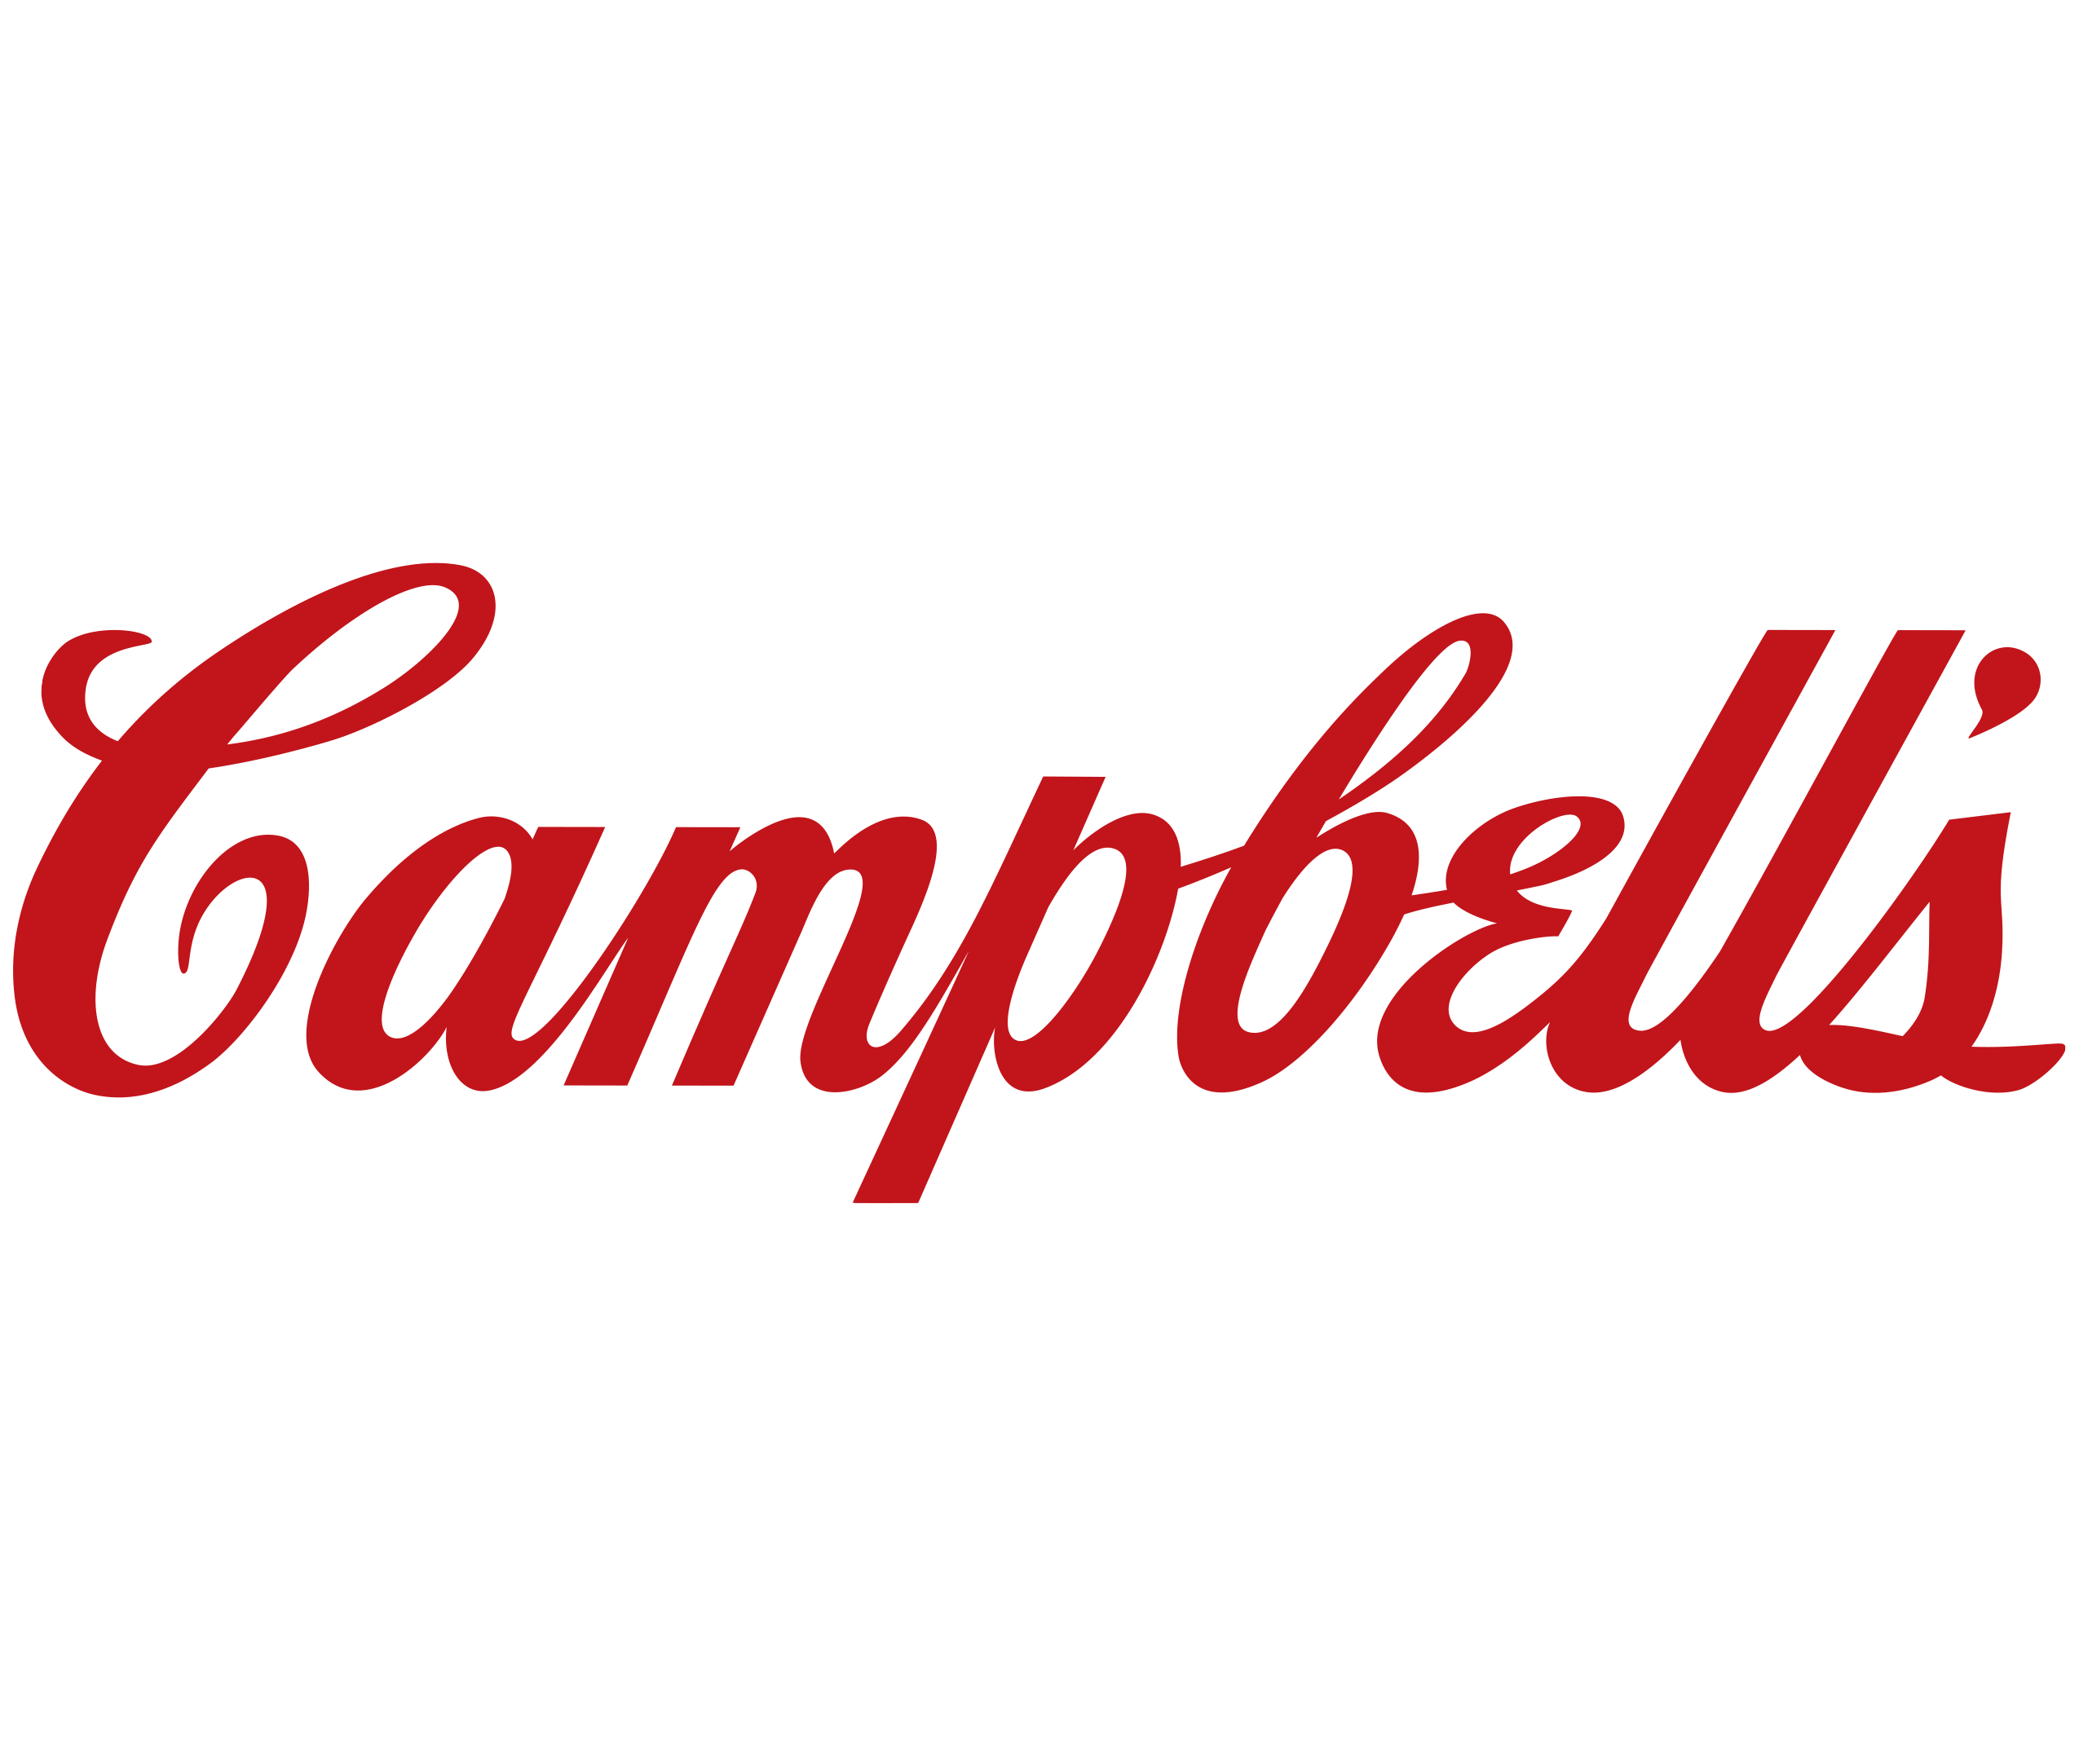 Campbell's Soup Company Logo - Campbell's Brand Logo | Campbell Soup Company